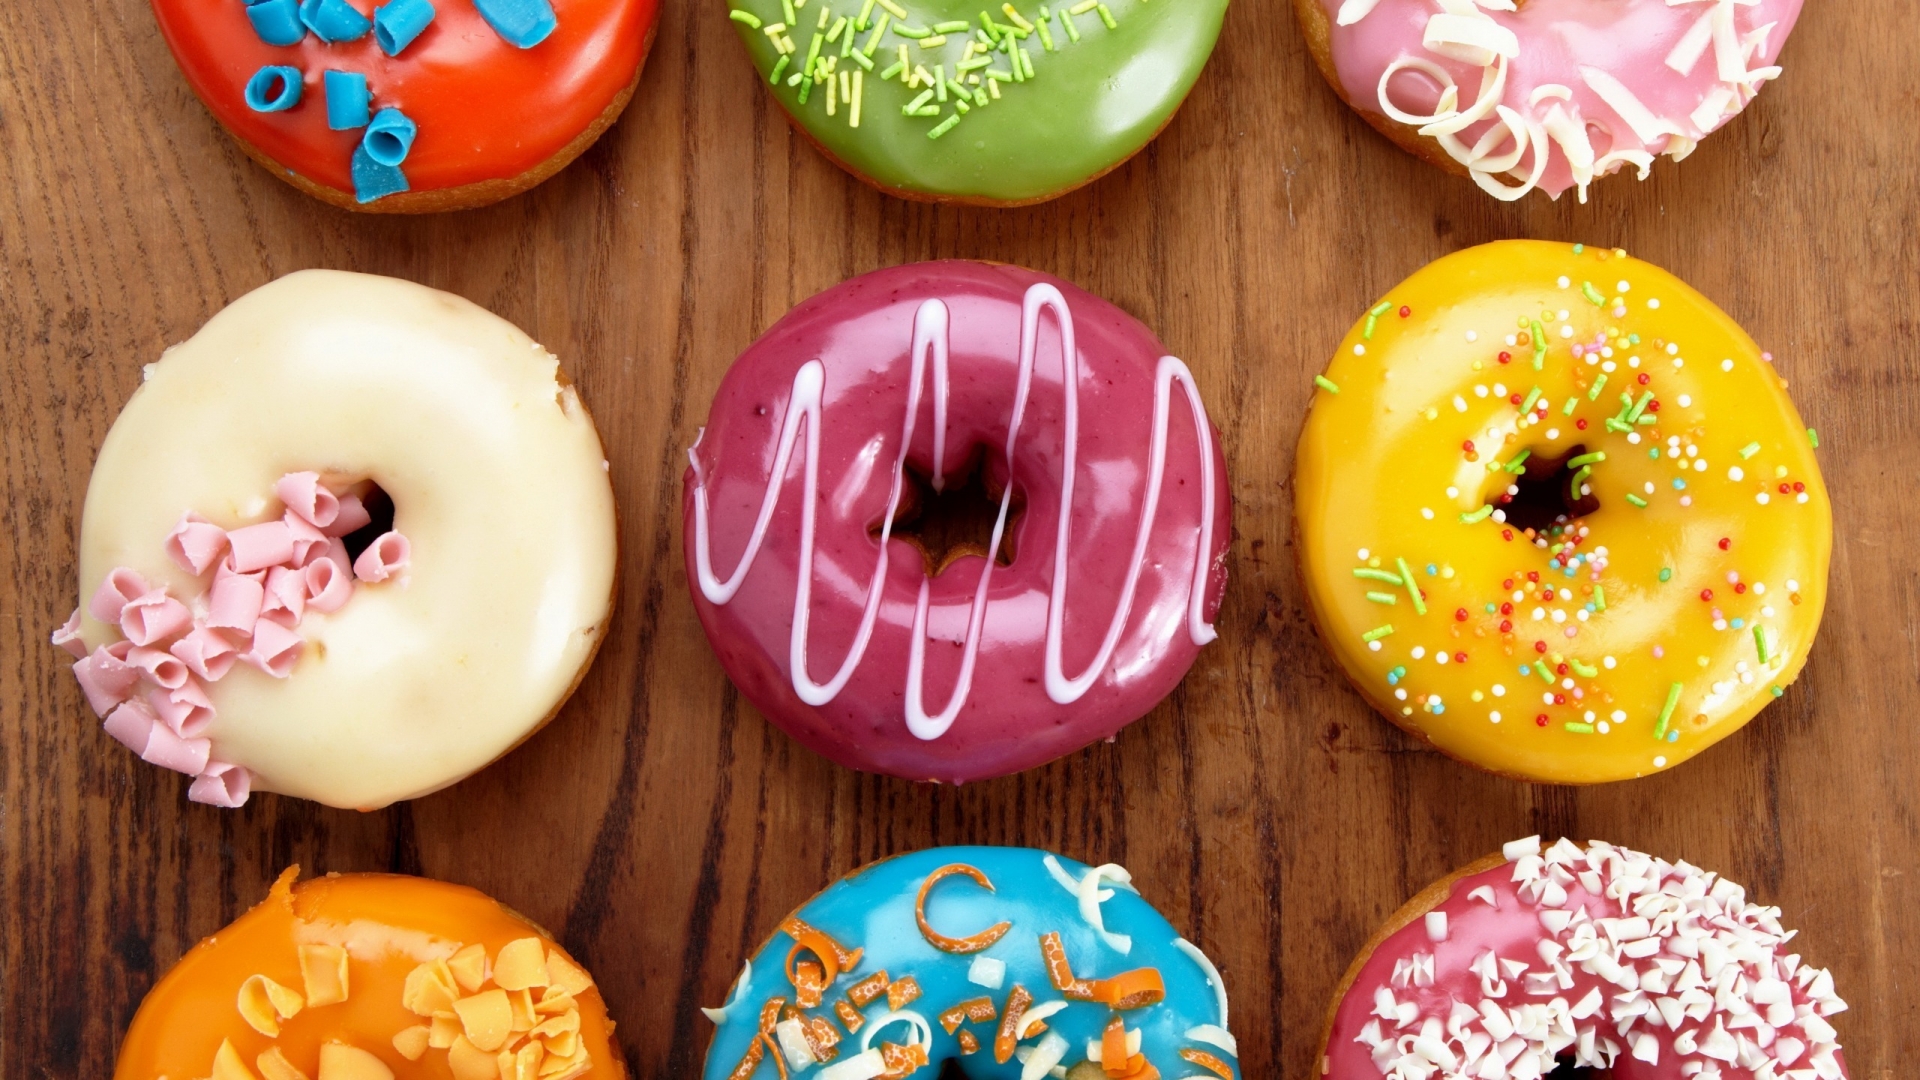 Glazed Donuts for 1920 x 1080 HDTV 1080p resolution